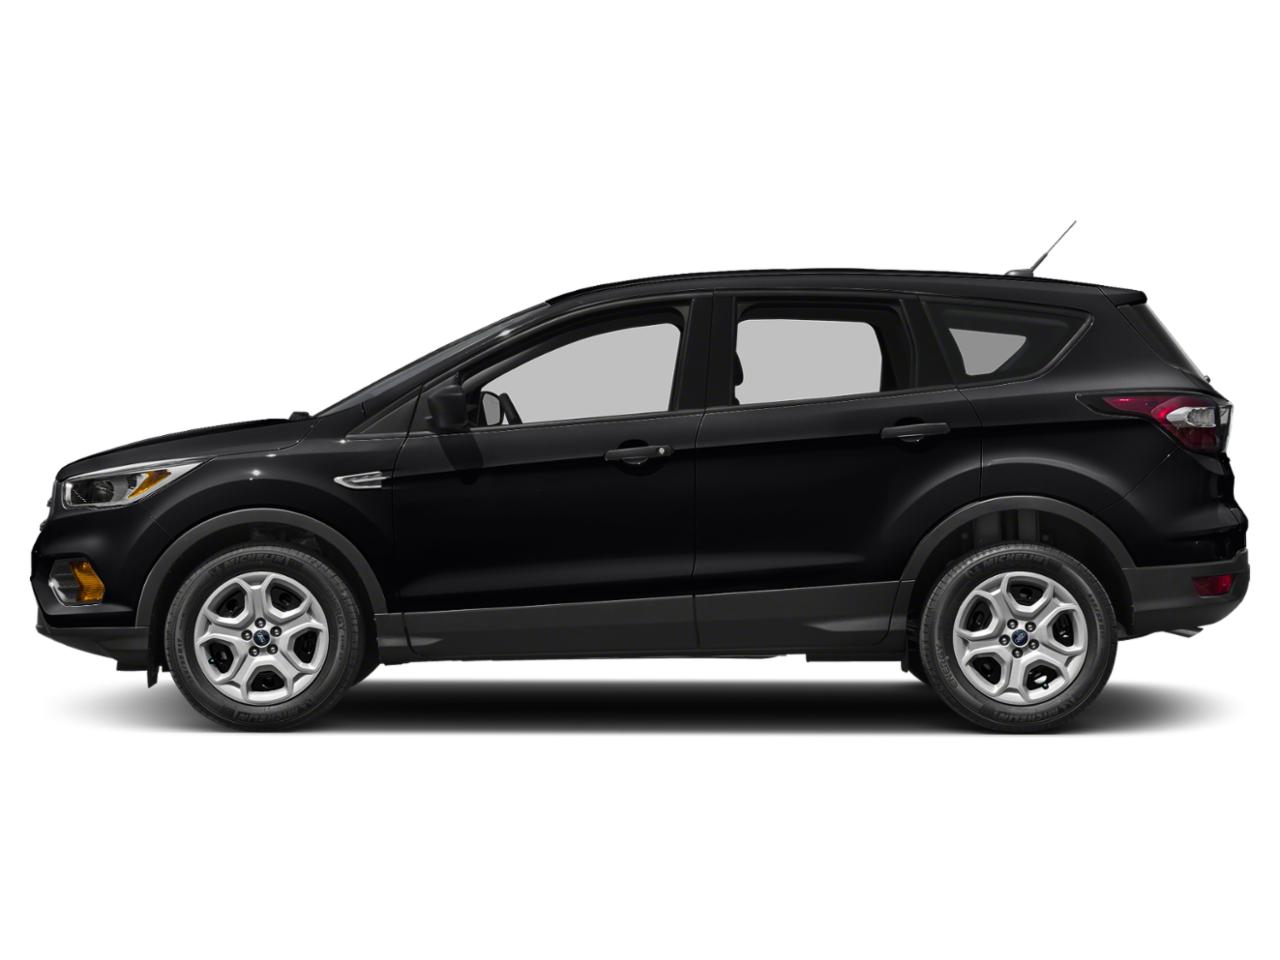 Used 2018 Ford Escape SE with VIN 1FMCU9GD3JUA38181 for sale in Glenwood, Minnesota